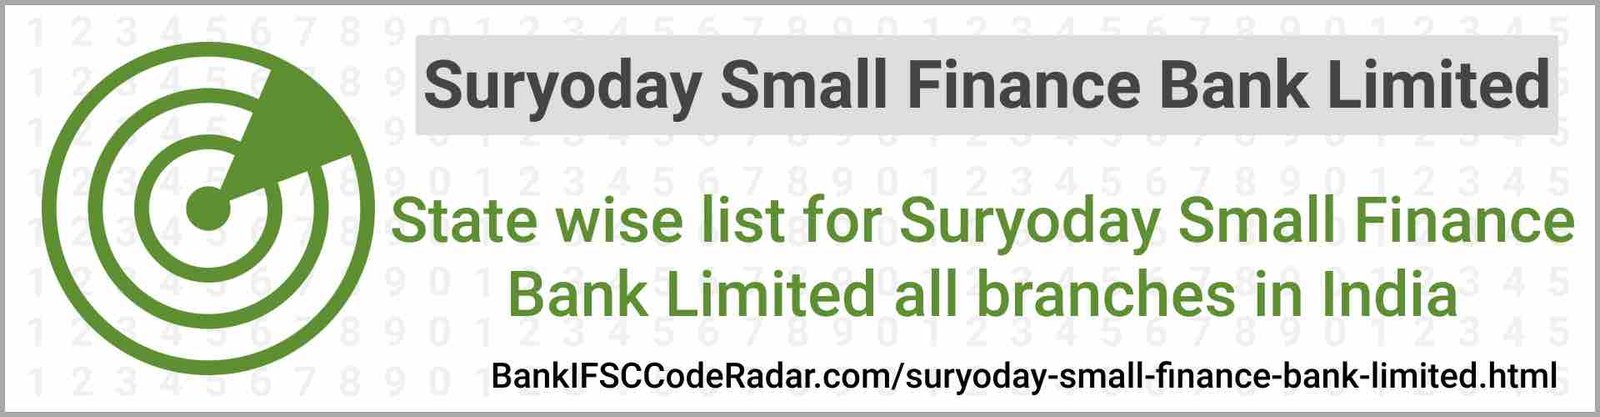 Suryoday Small Finance Bank Limited All Branches India